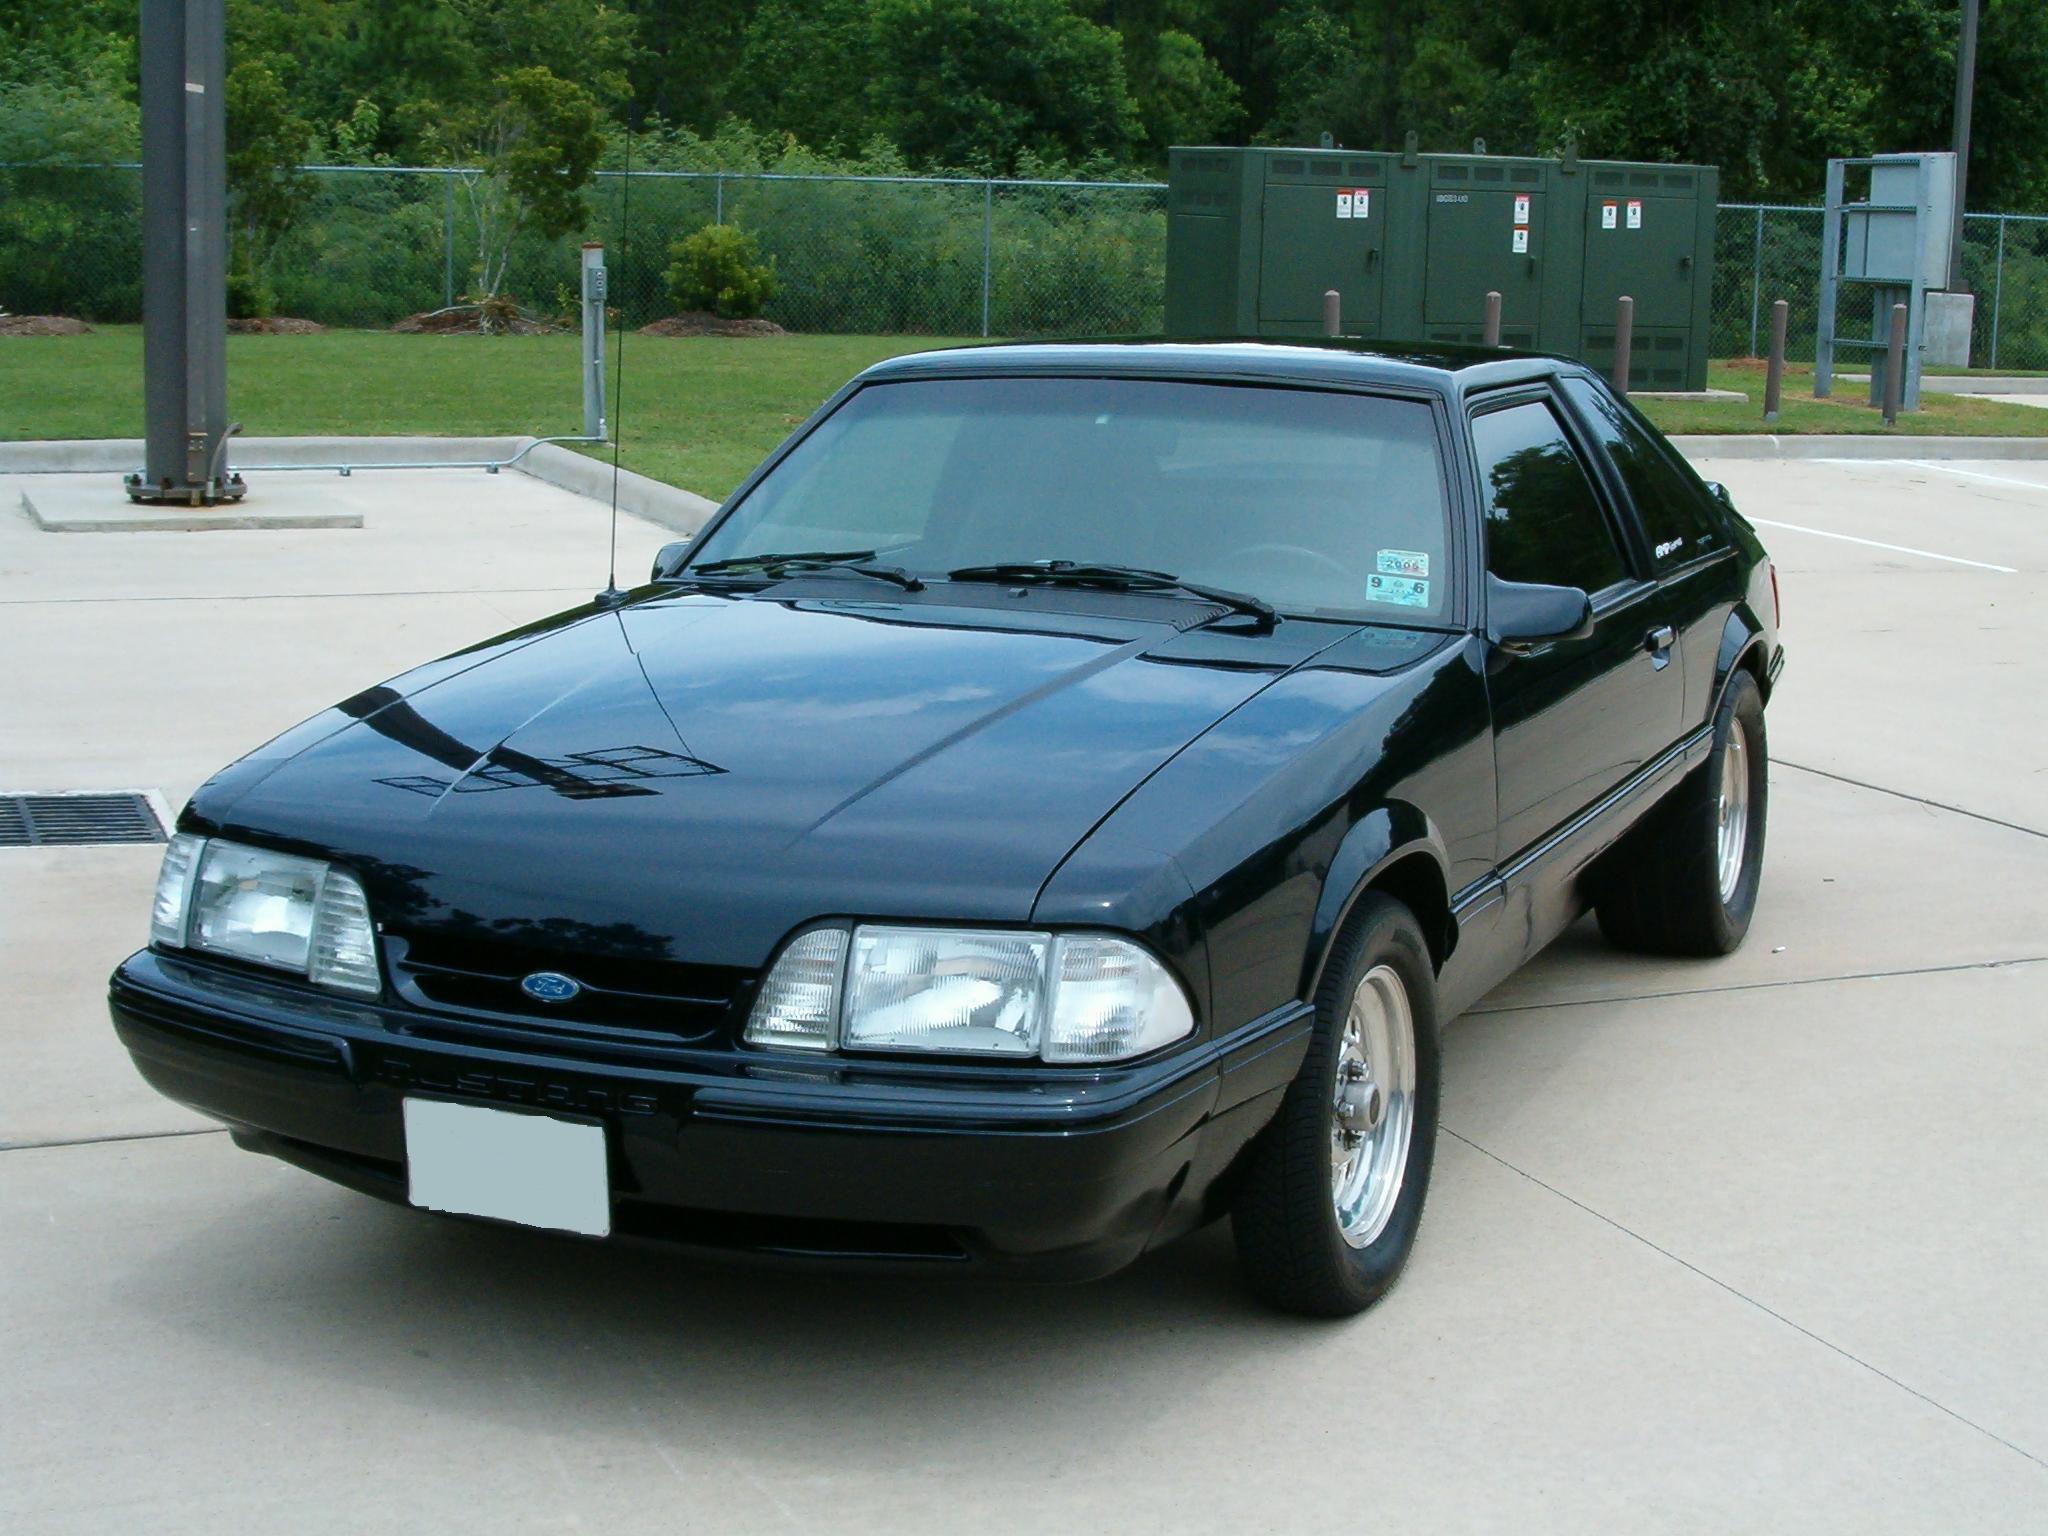 1989 Ford mustang lx hatchback specs